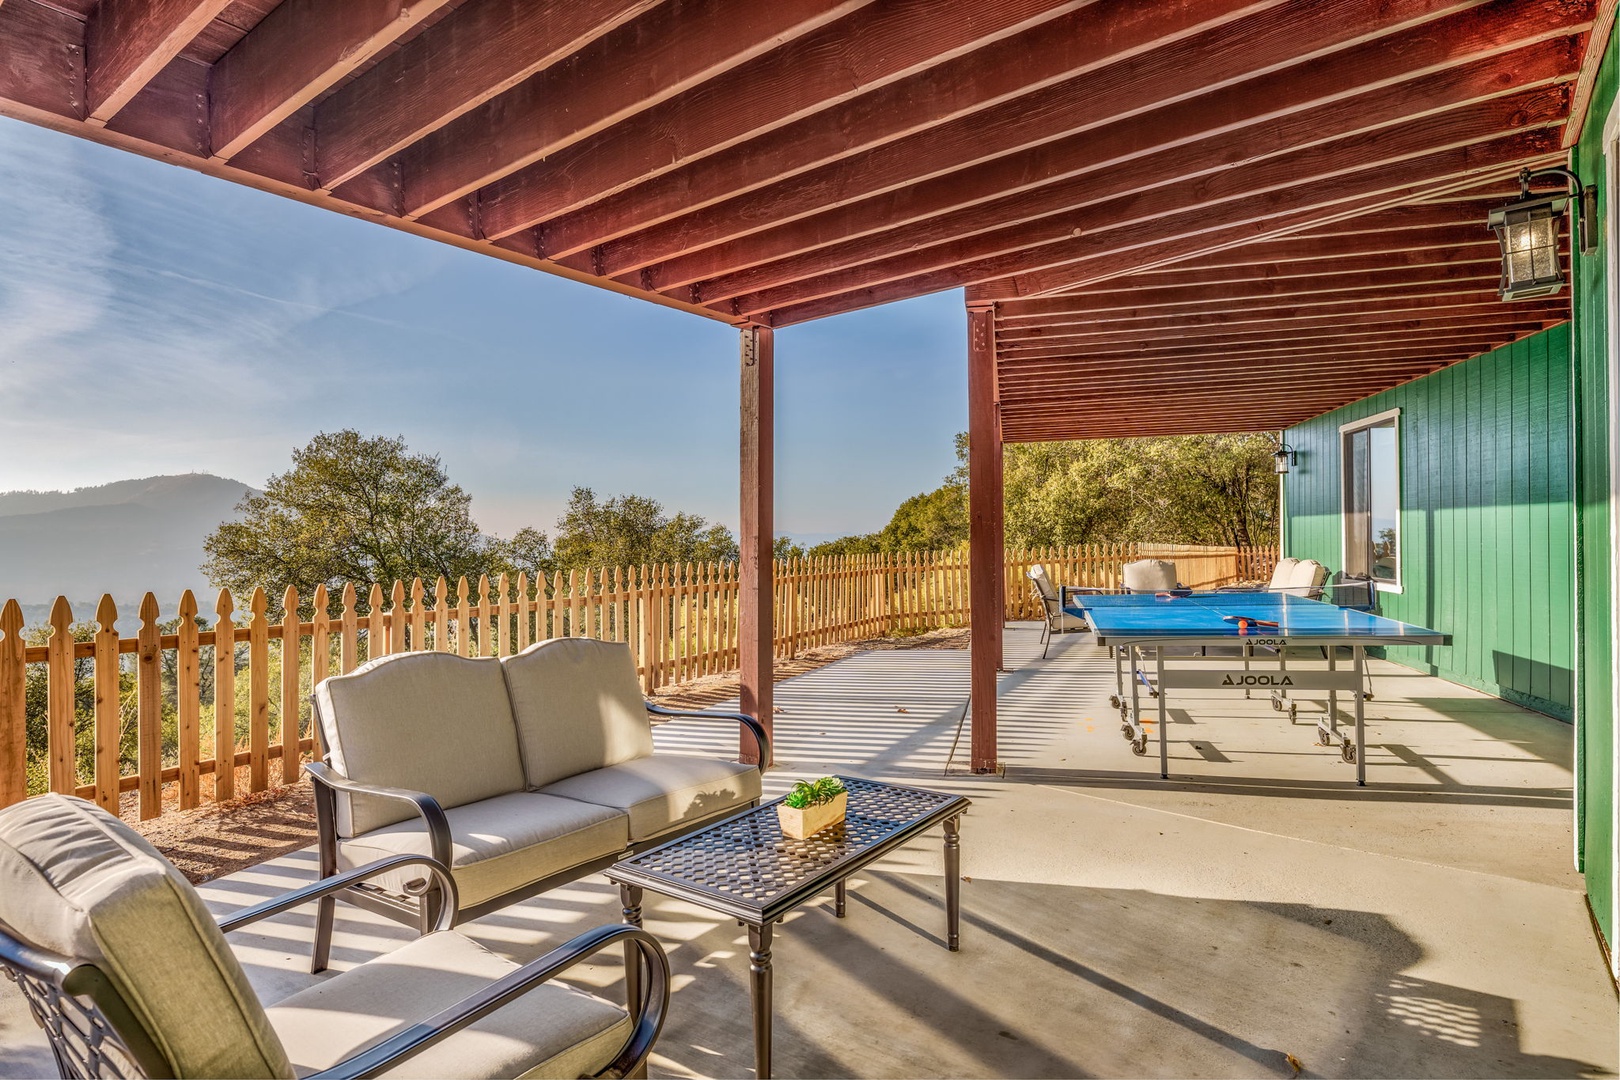 Sweeping mountain views will astound from both levels of the spacious back deck